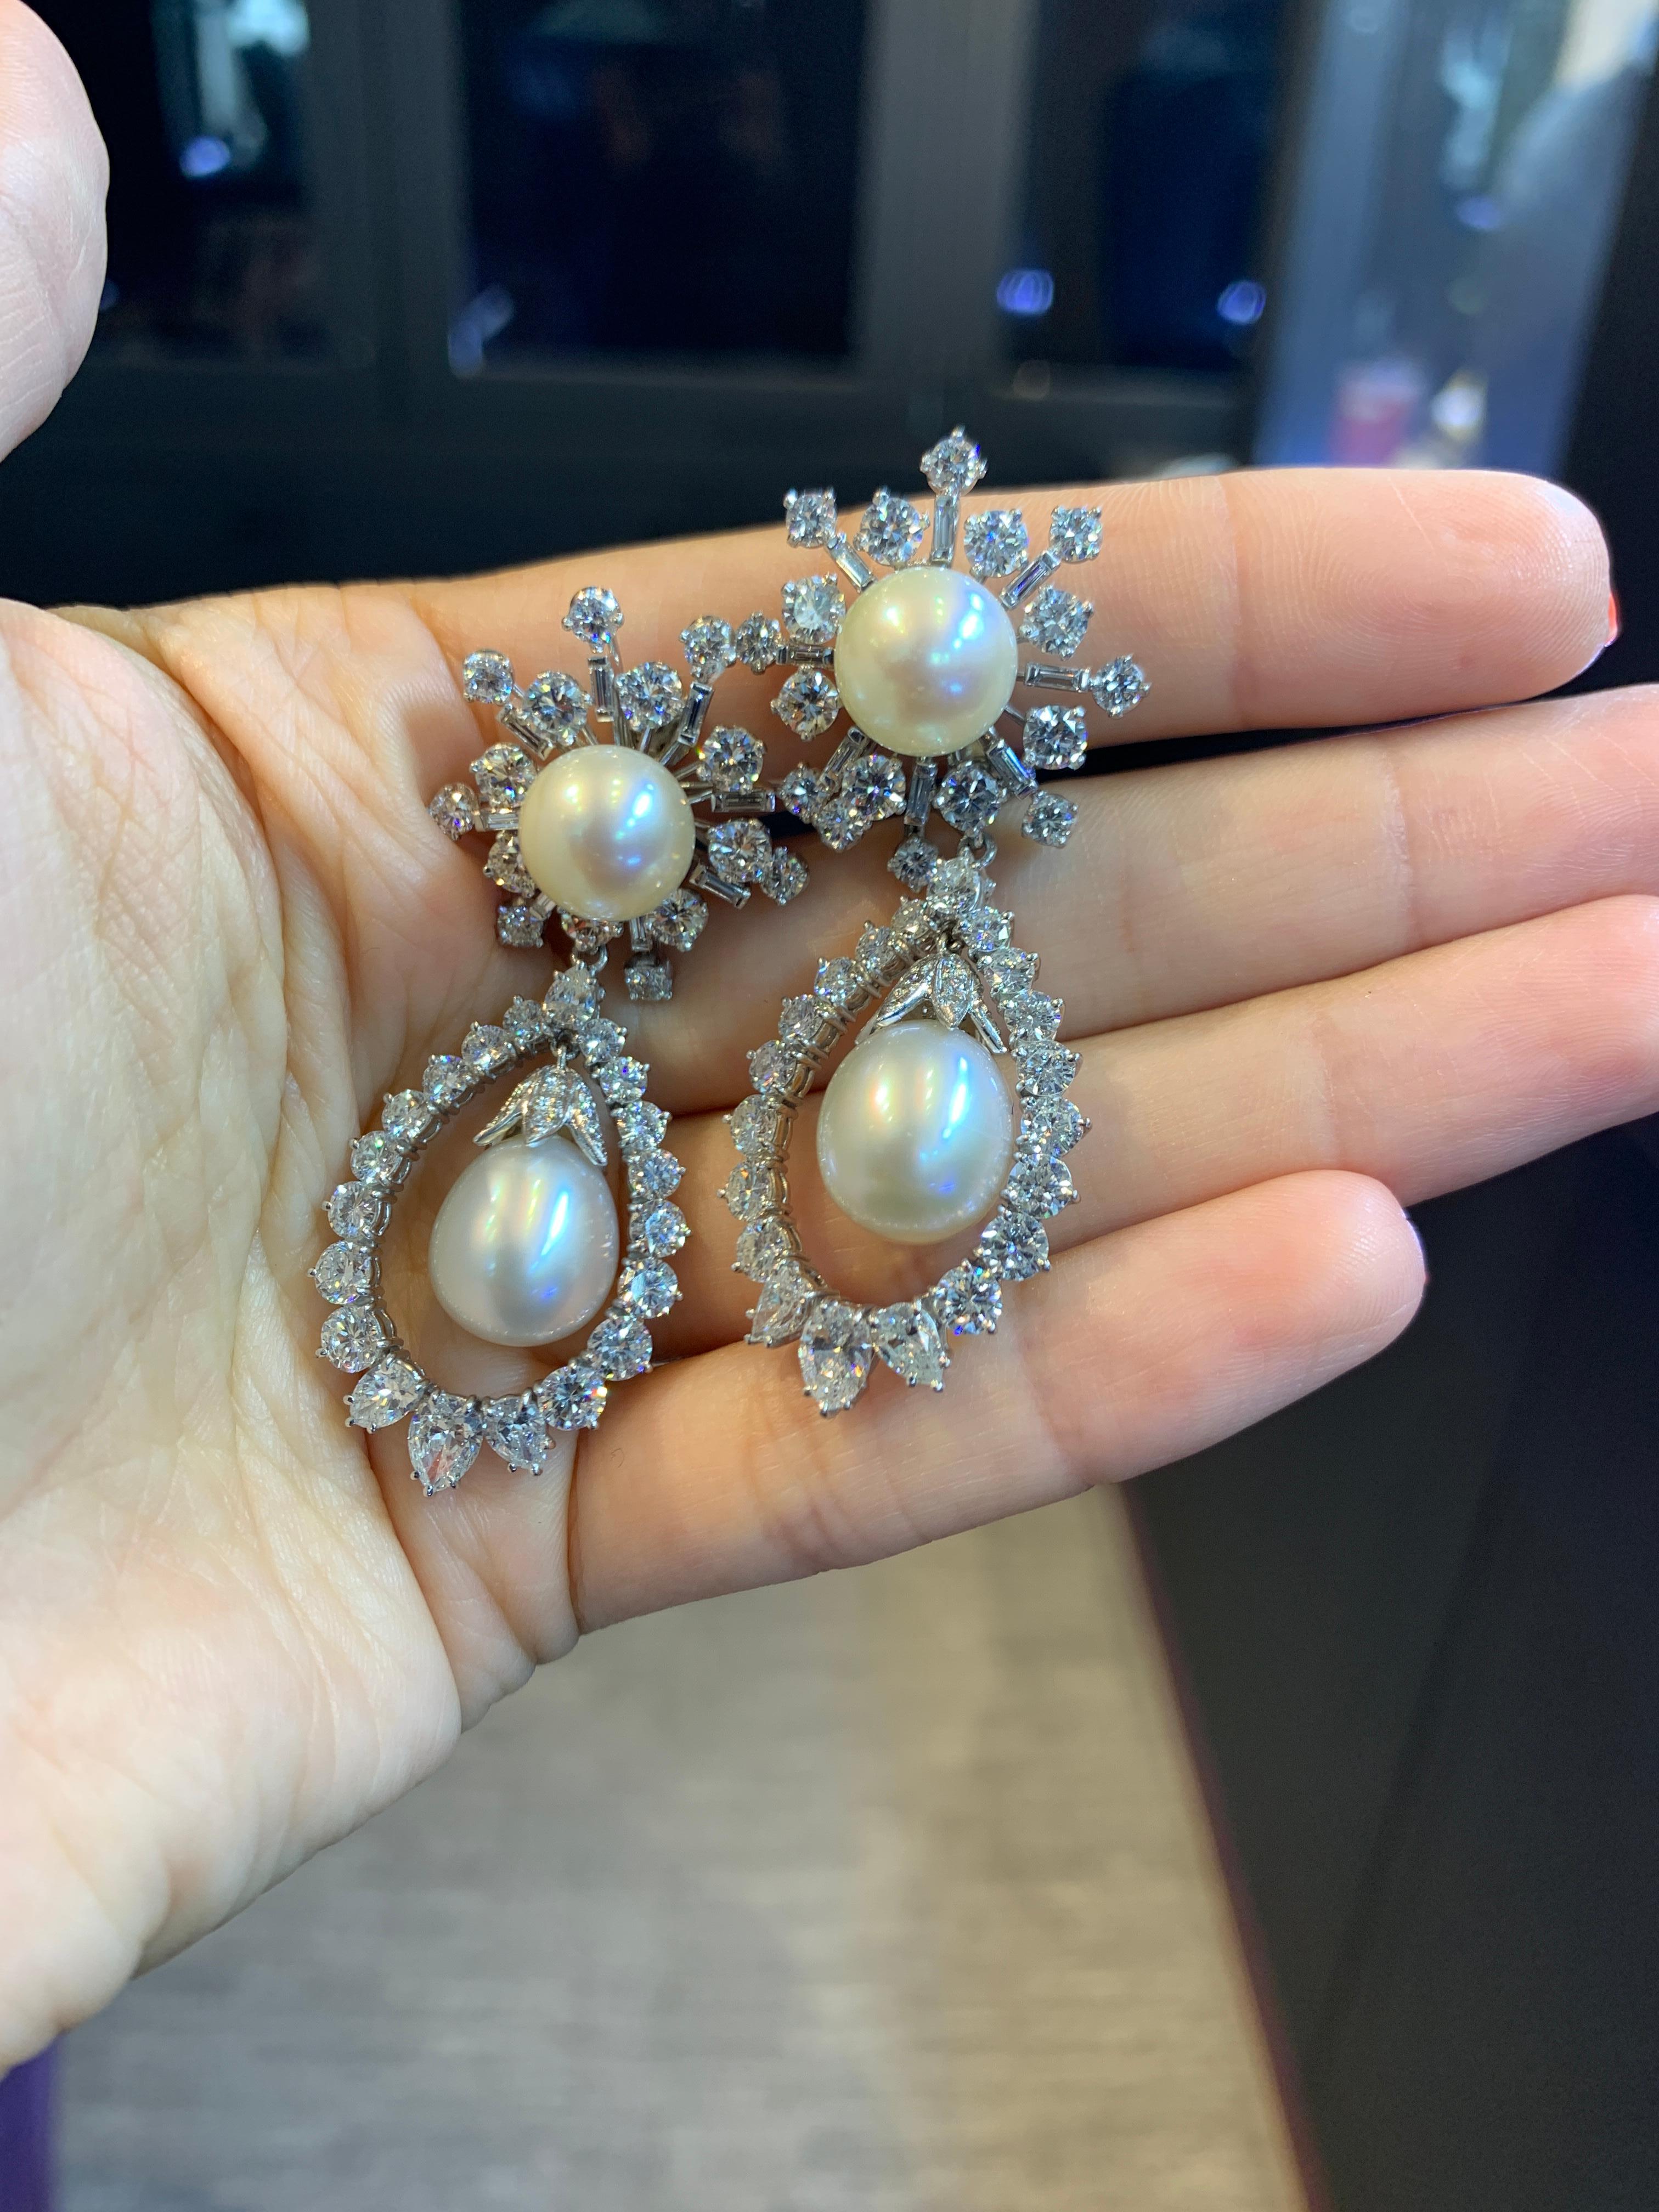 Harry Winston Pearl And Diamond Dangle Drop Earrings
2.10 total carats of diamonds set in platinum along with two Cultured Pearls 
Back Type: Clip On